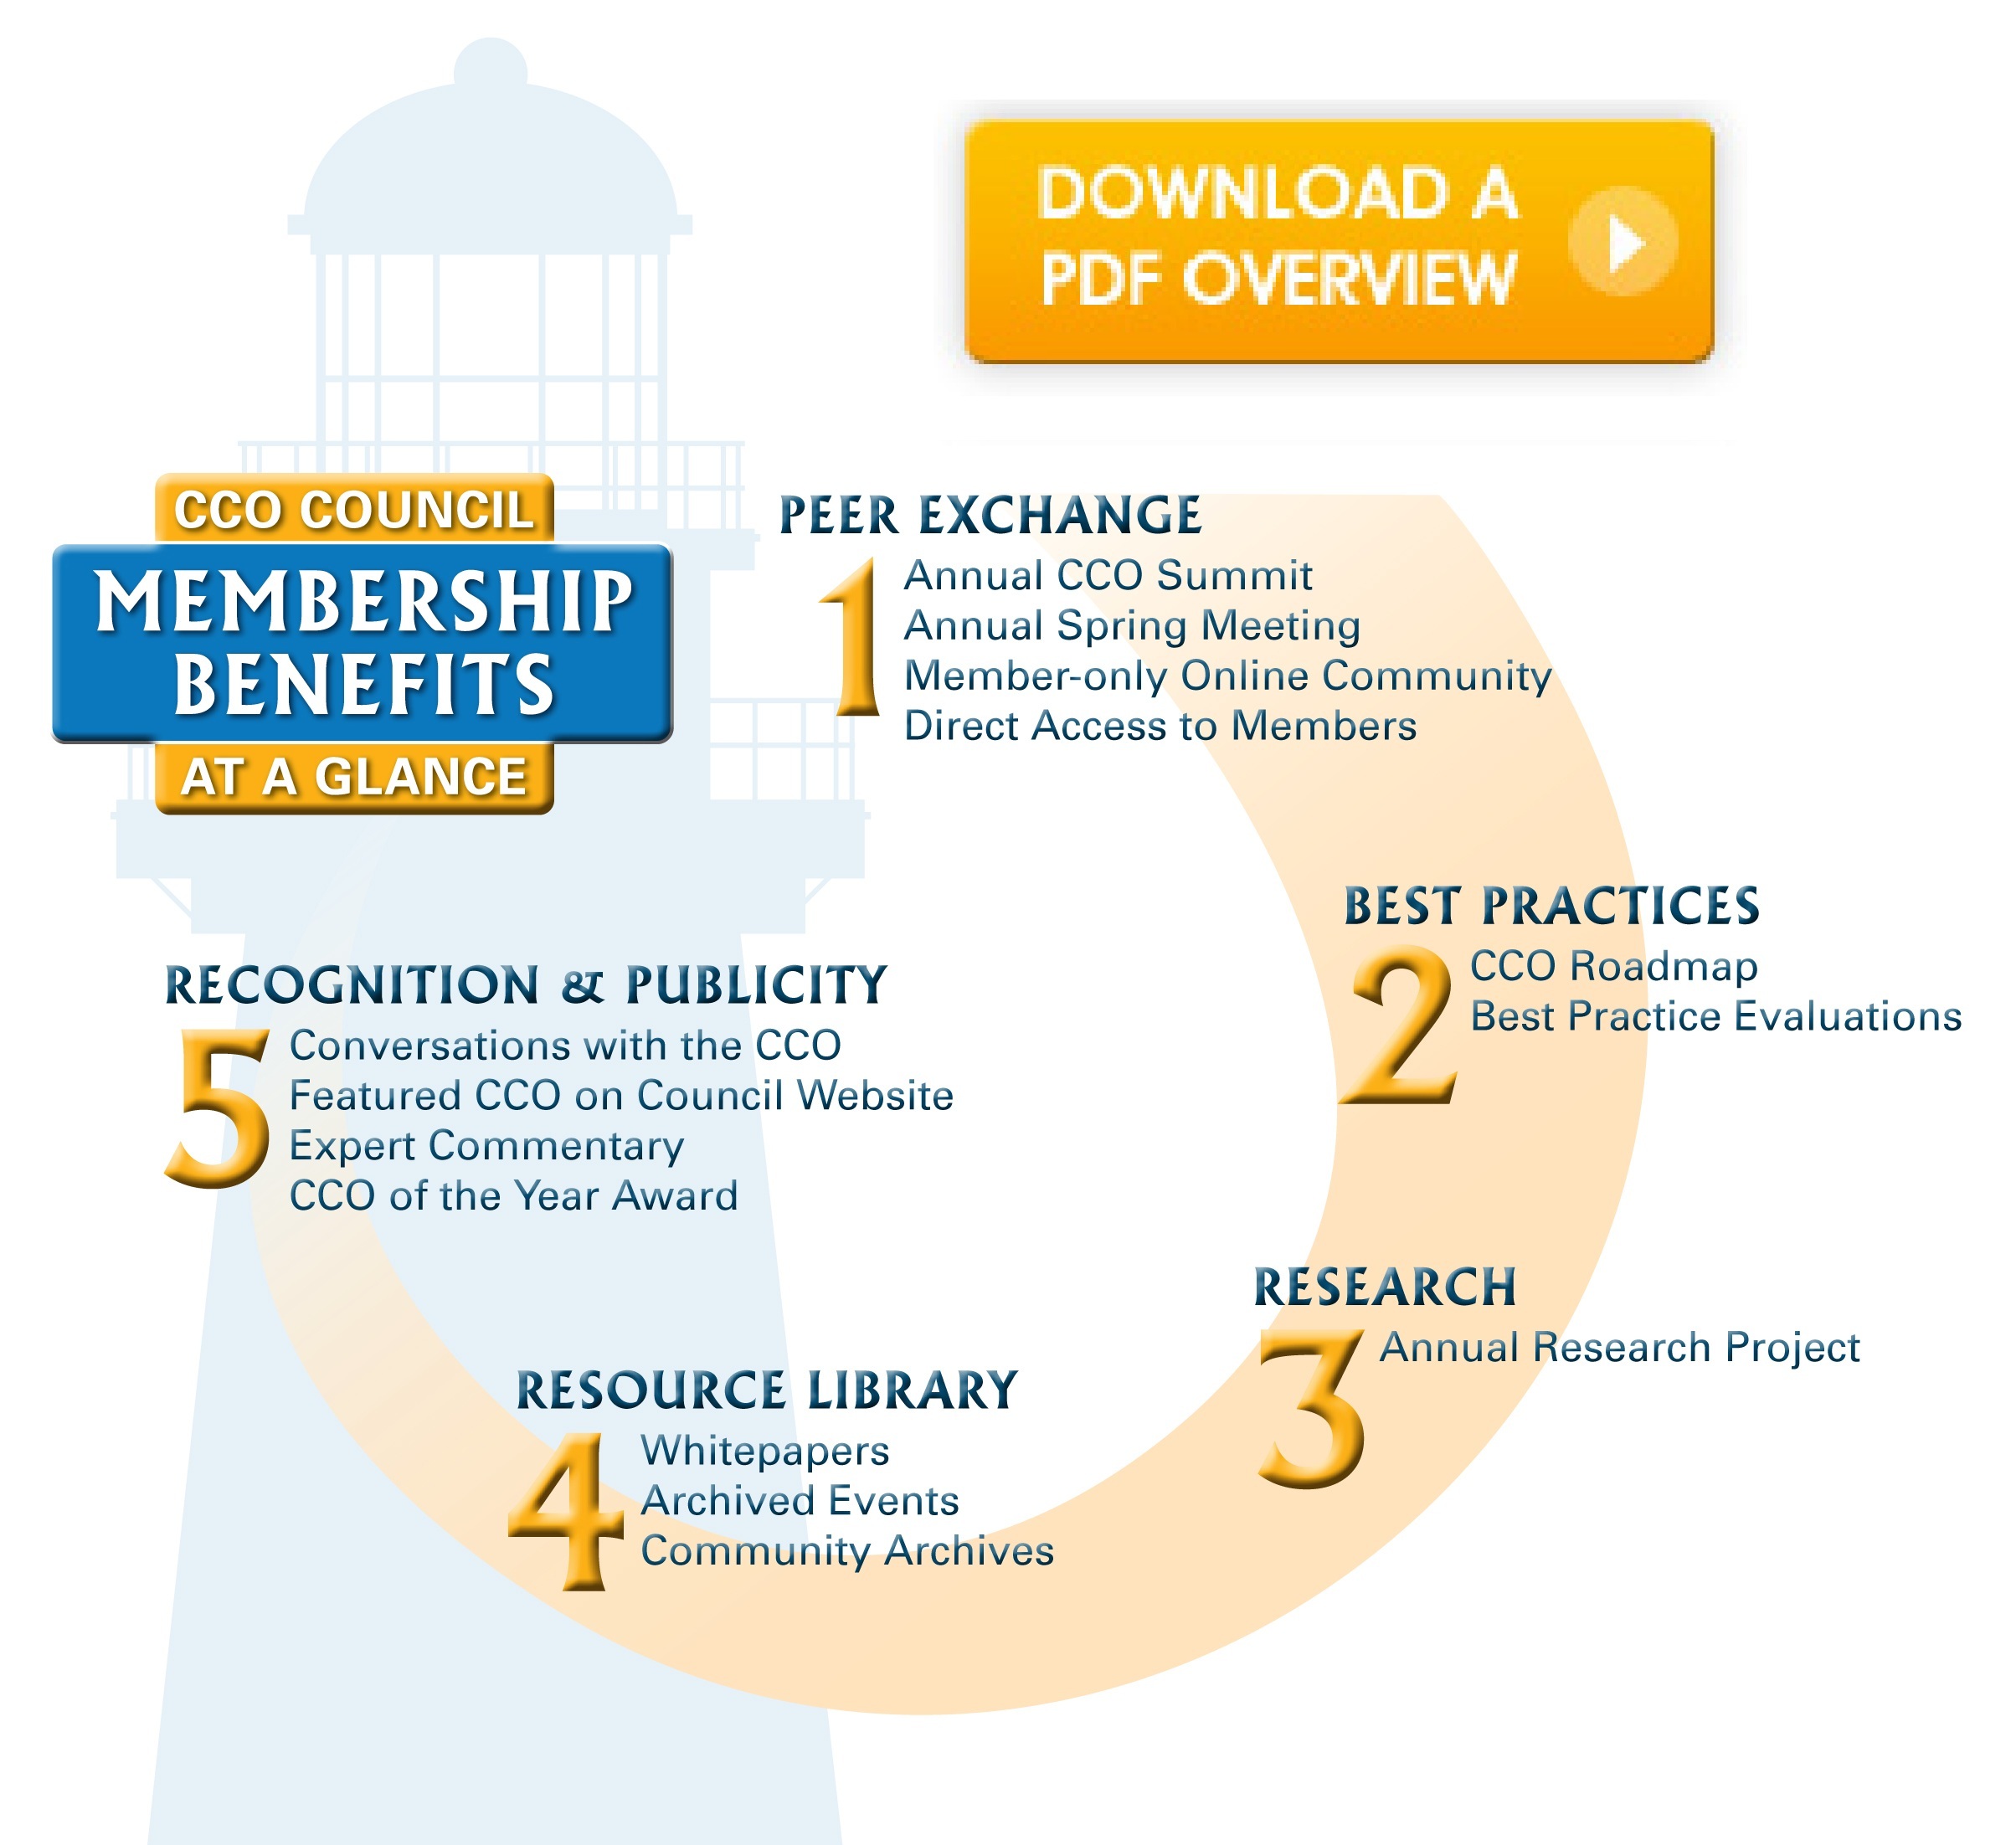 Benefits of Membership to the CCO Council